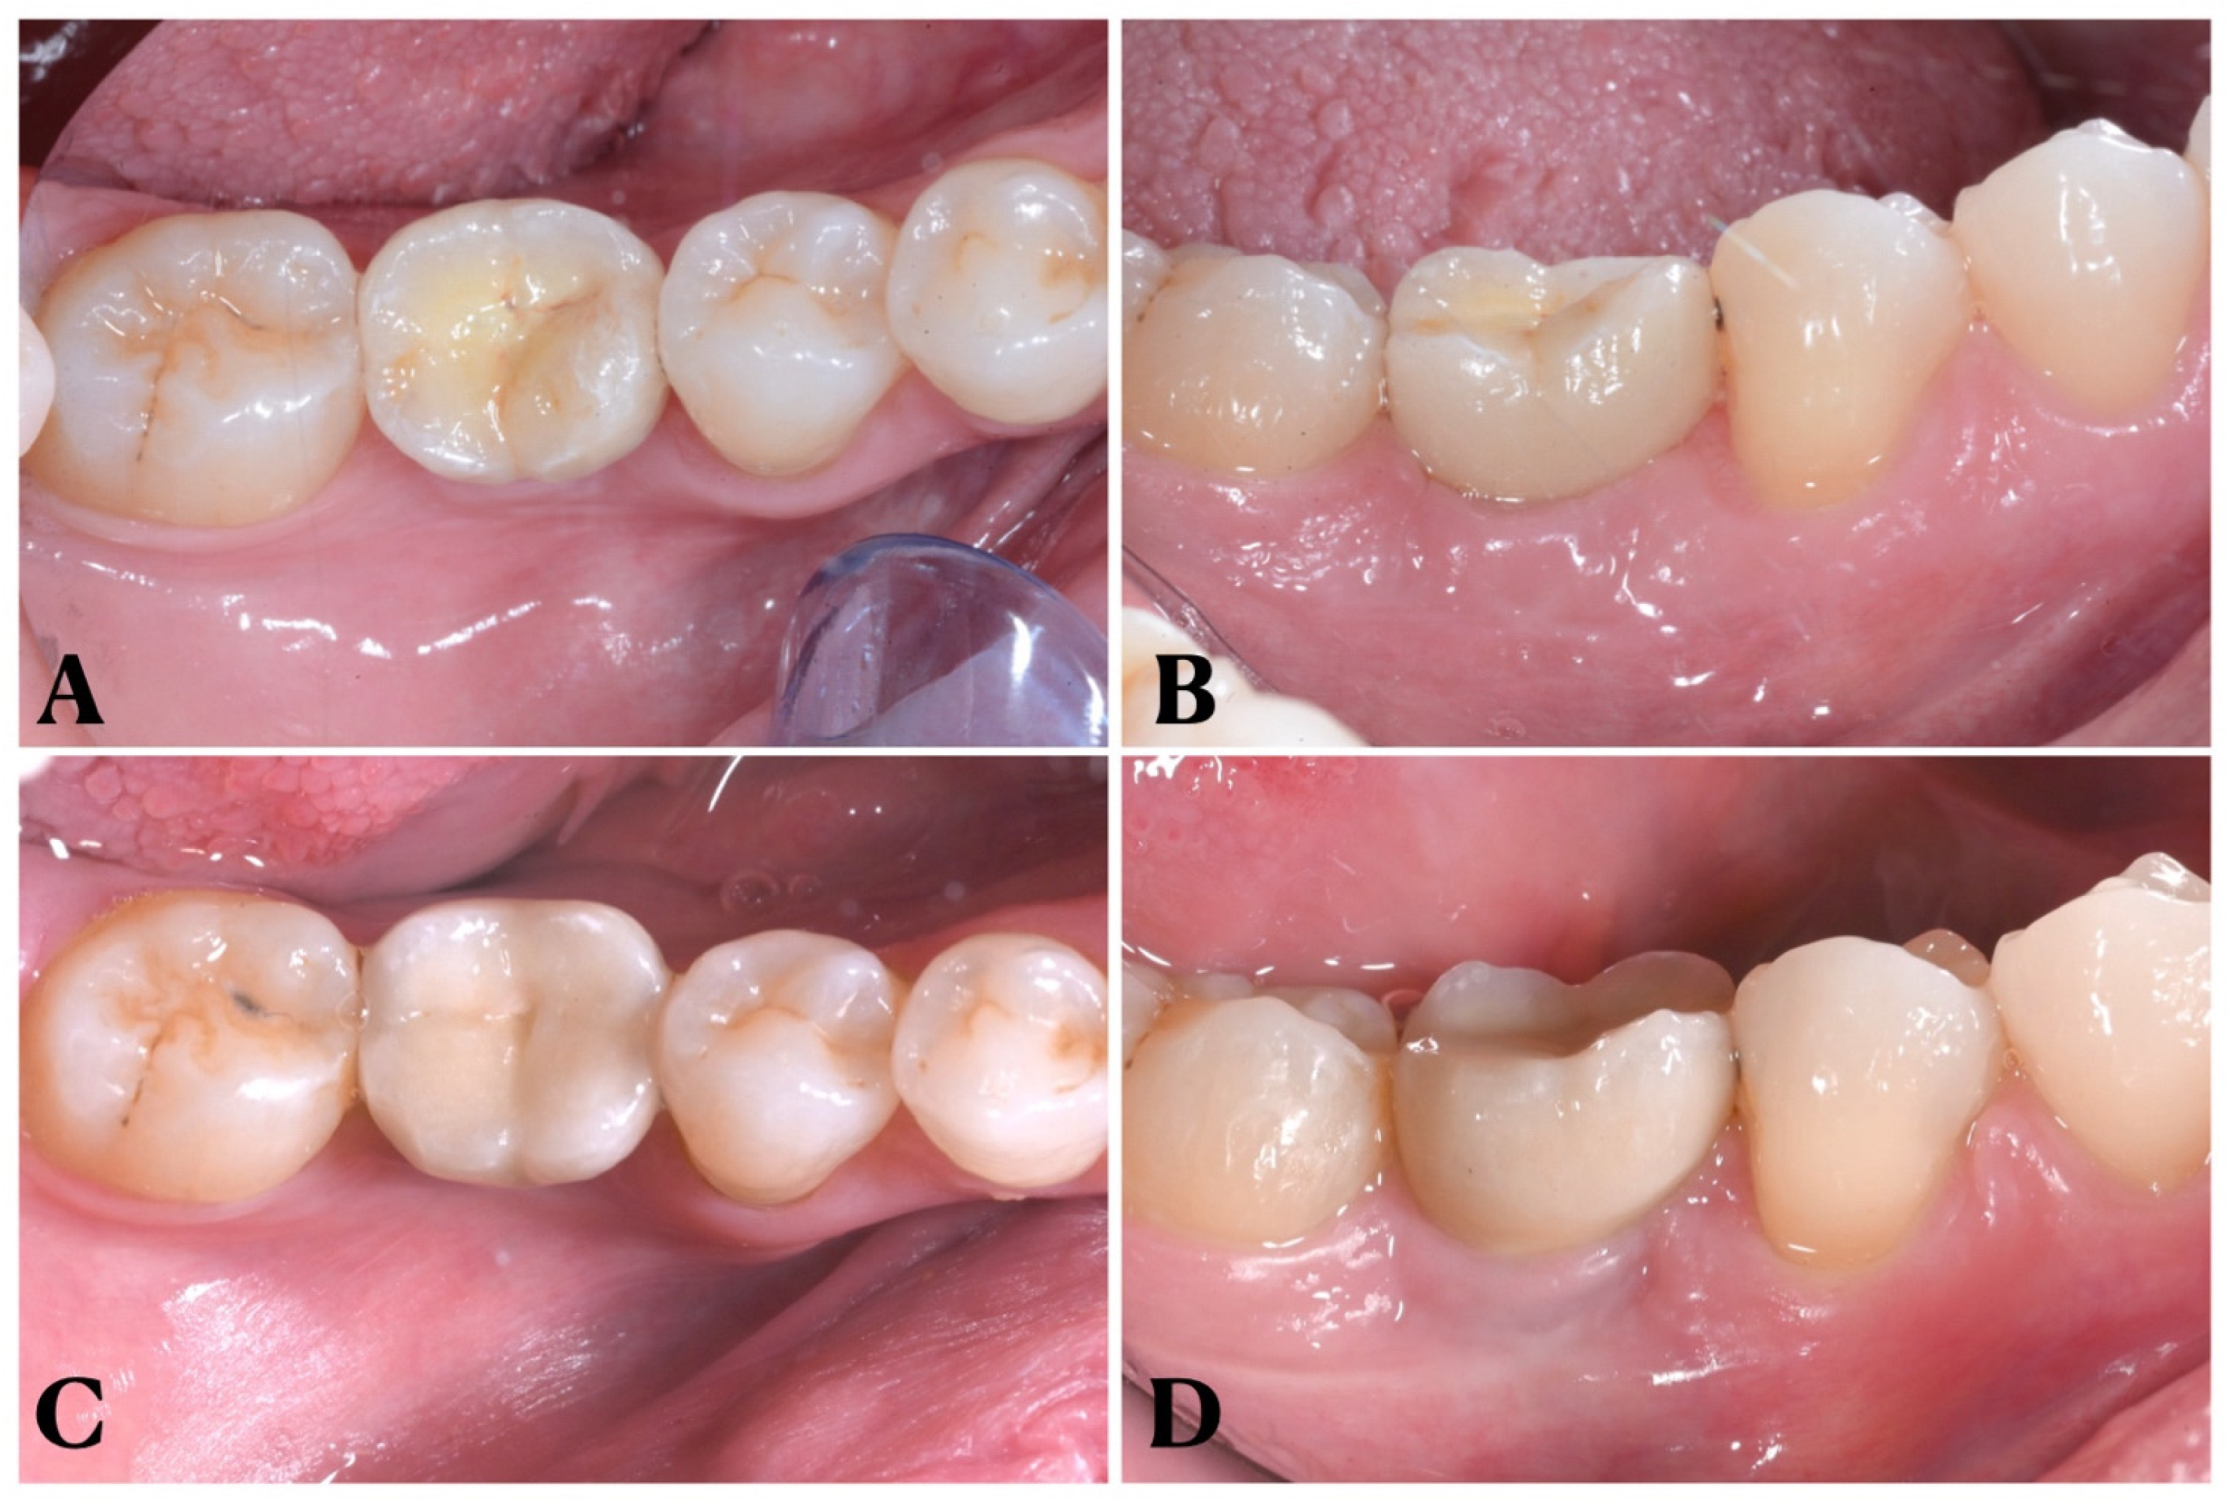 Cureus, Comparative Clinical Study Between Chlorhexidine Gel (0.2%) and  Hyaluronic Gel (1%) in the Prevention of a Dry Socket After Tooth  Extraction for Orthodontic Treatment